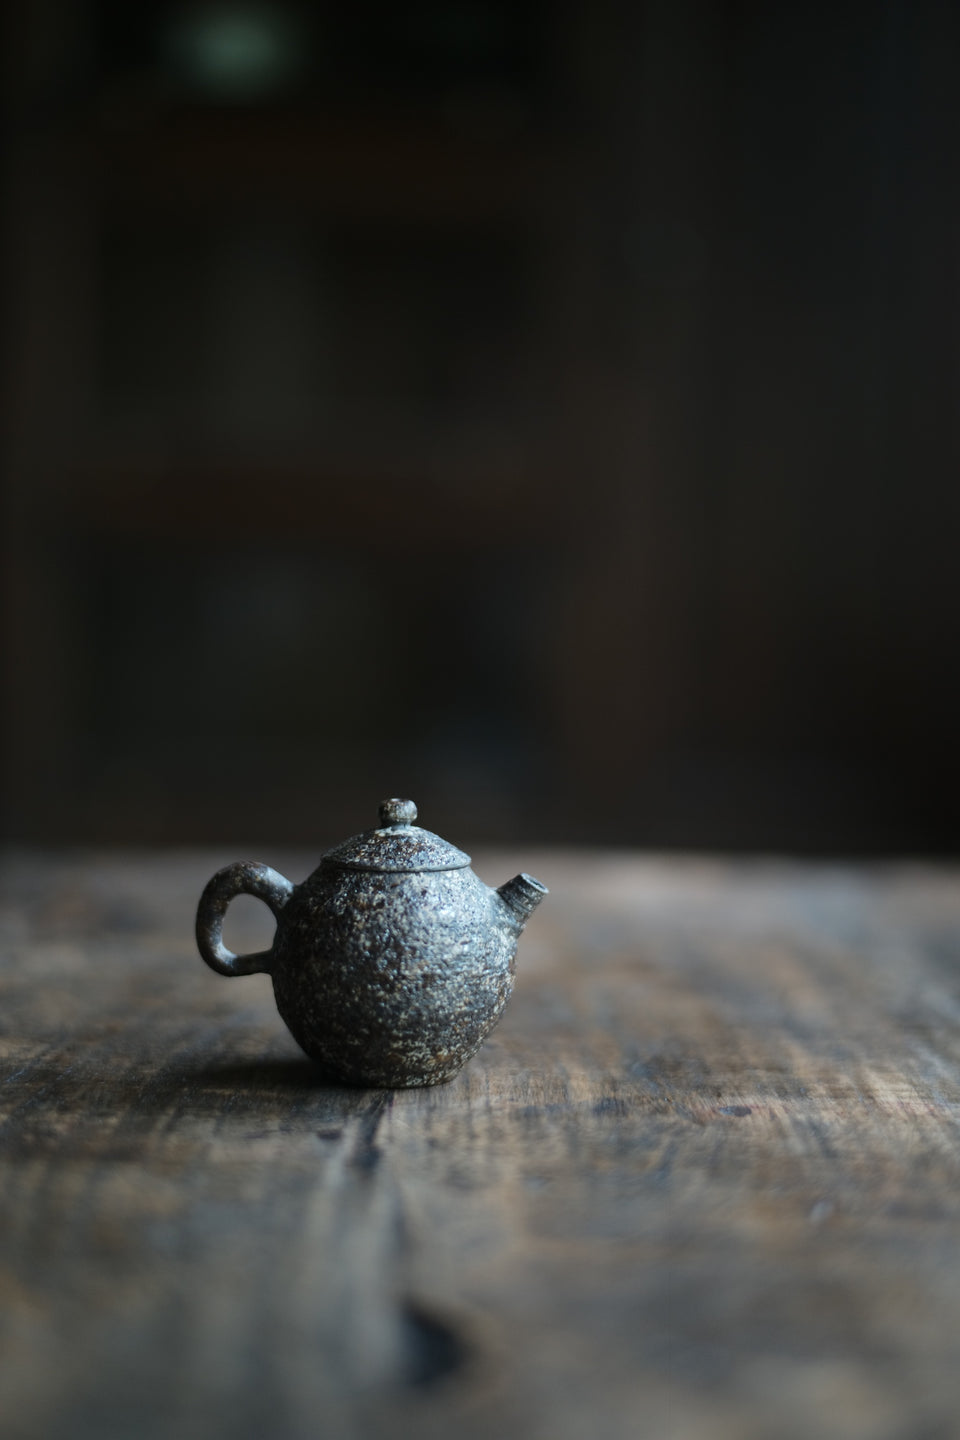 Natural Earth Textured Teapot #5 by Chengwei